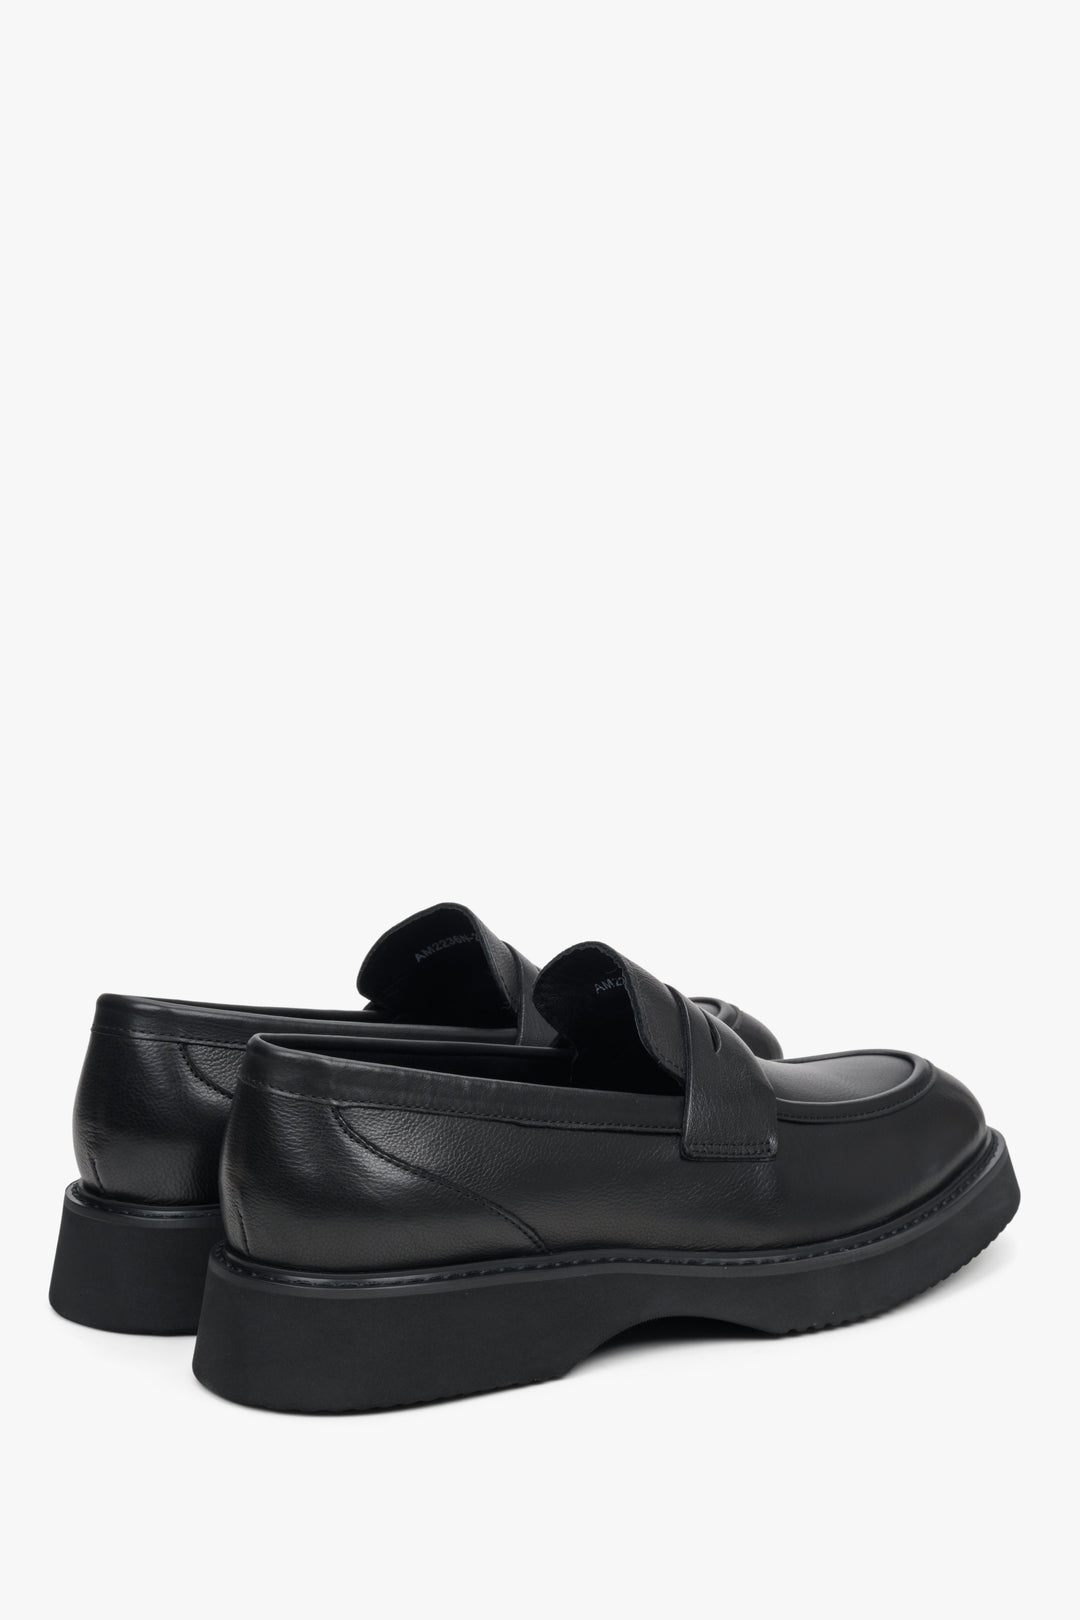 Men's black leather Estro loafers - close-up on the heel and side line of the shoe.